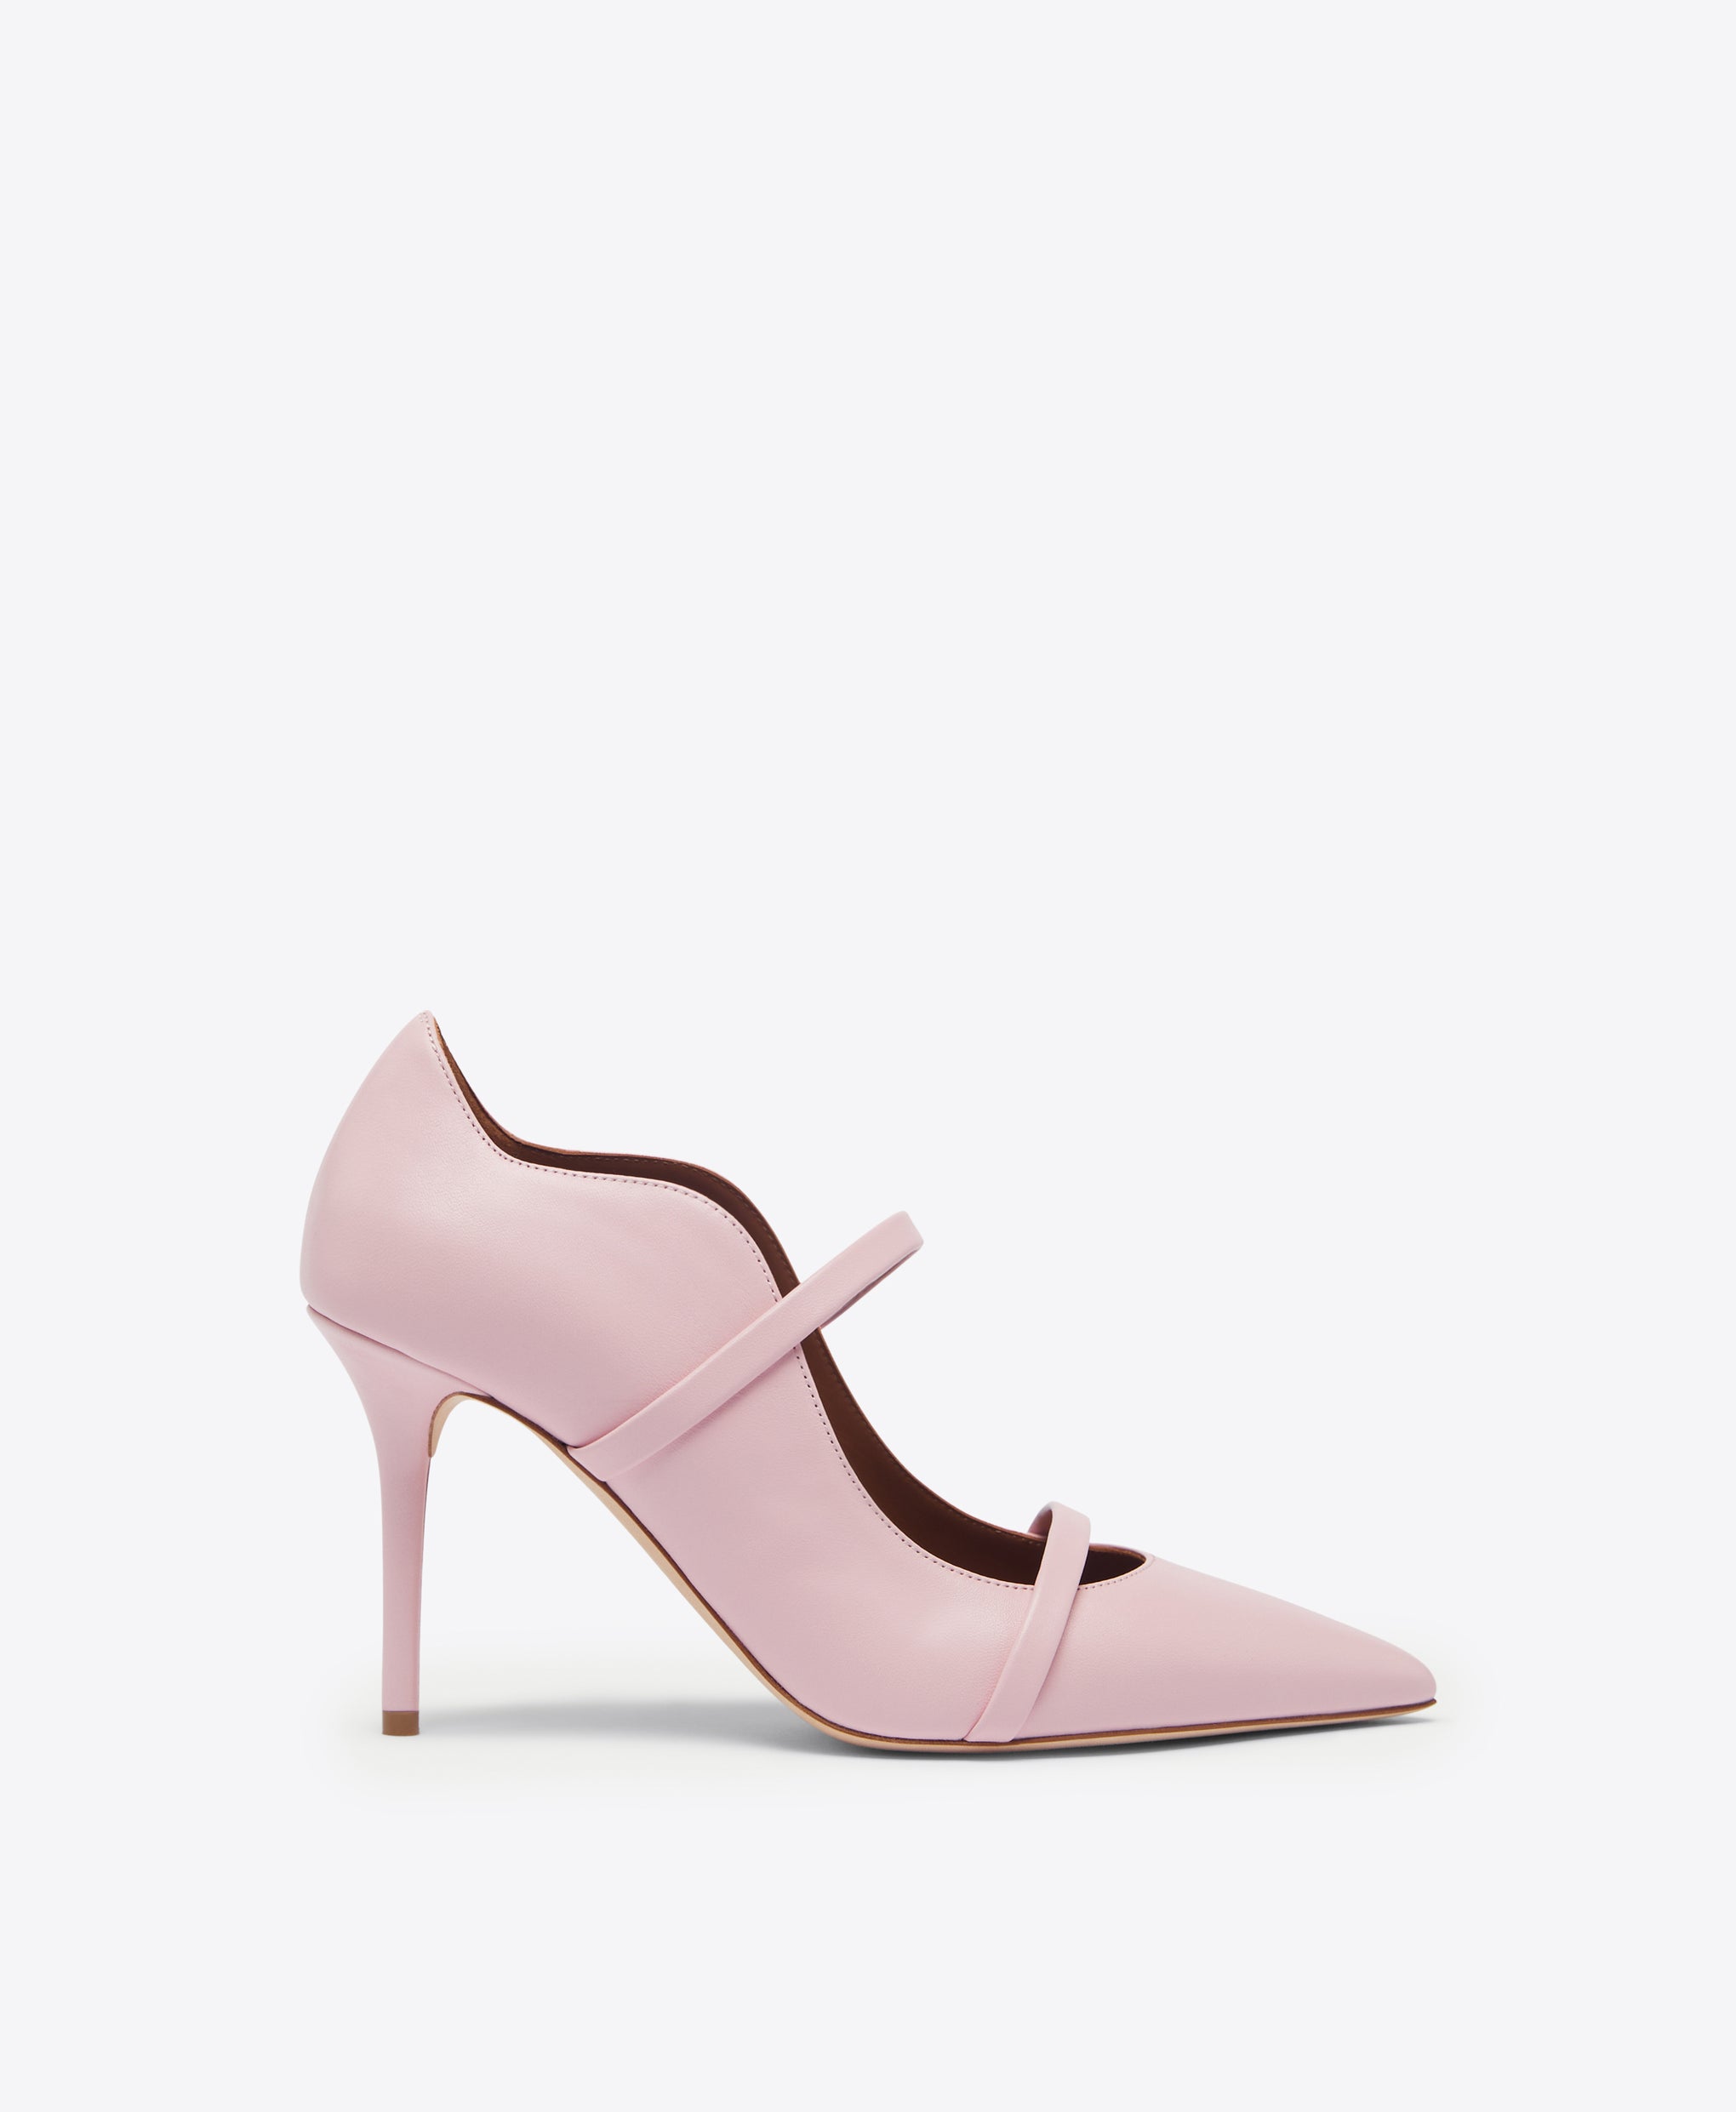 Malone Souliers Maureen 85mm Light Pink Leather Heeled Pumps